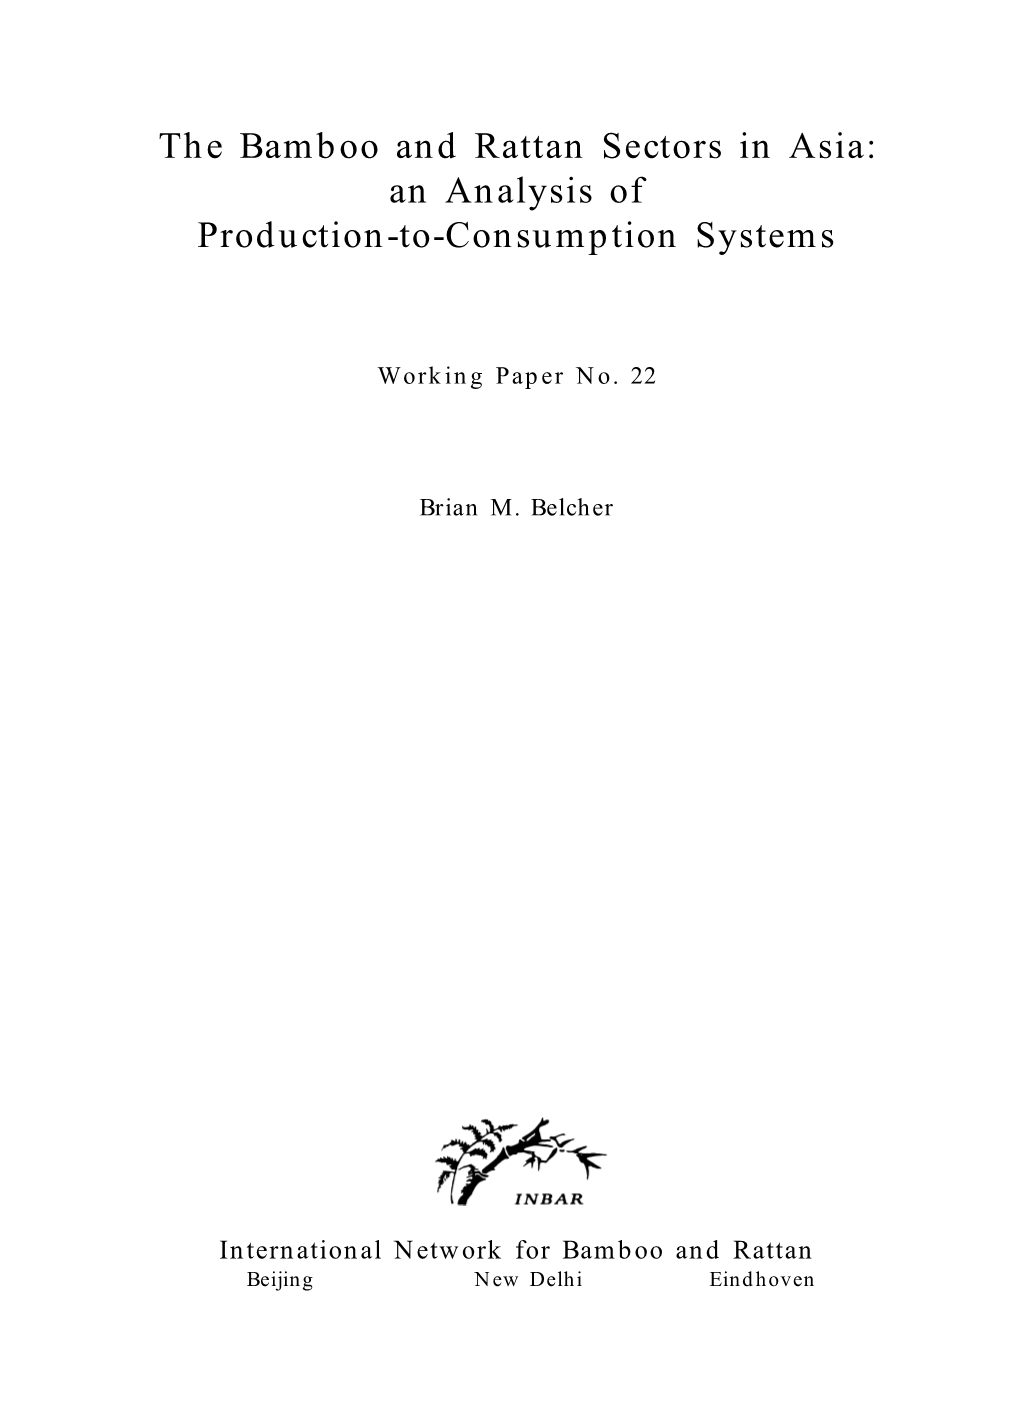 The Bamboo and Rattan Sectors in Asia: an Analysis of Production-To-Consumption Systems